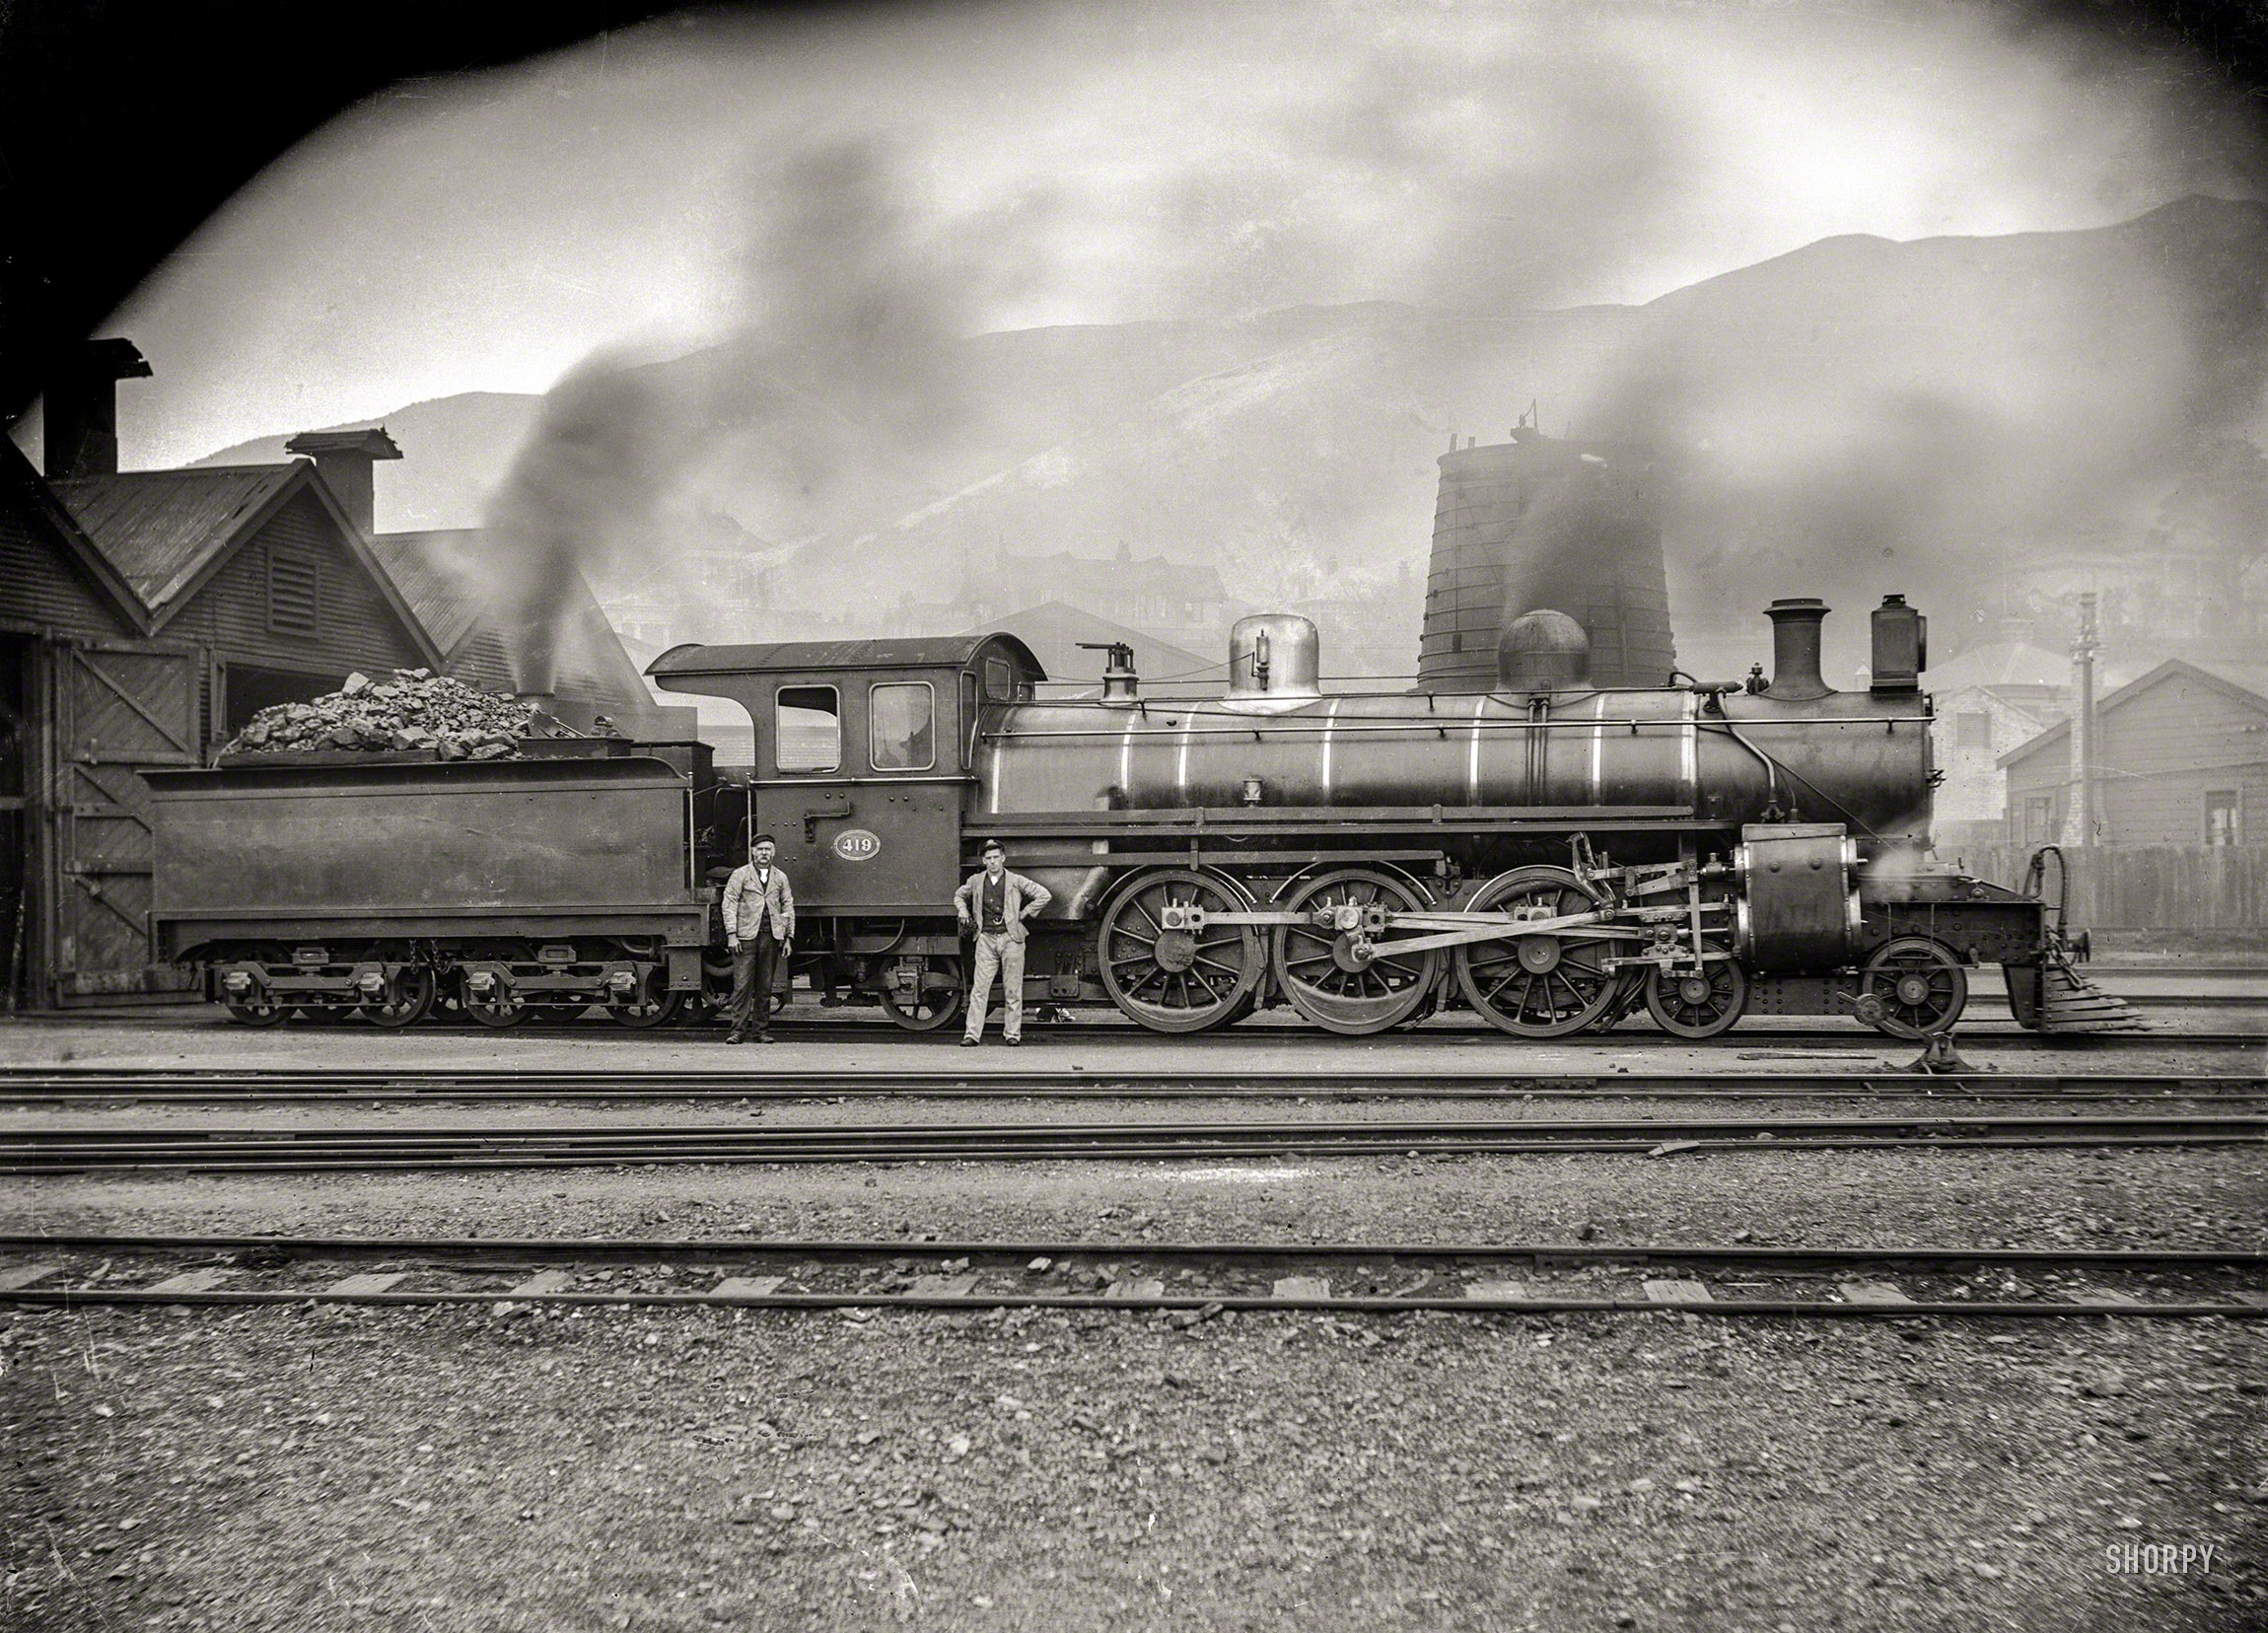 New Zealand circa 1909. "Class A locomotive, NZR No. 419, at the Petone Railway Workshops." A.P. Godber Collection, Alexander Turnbull Library. View full size.